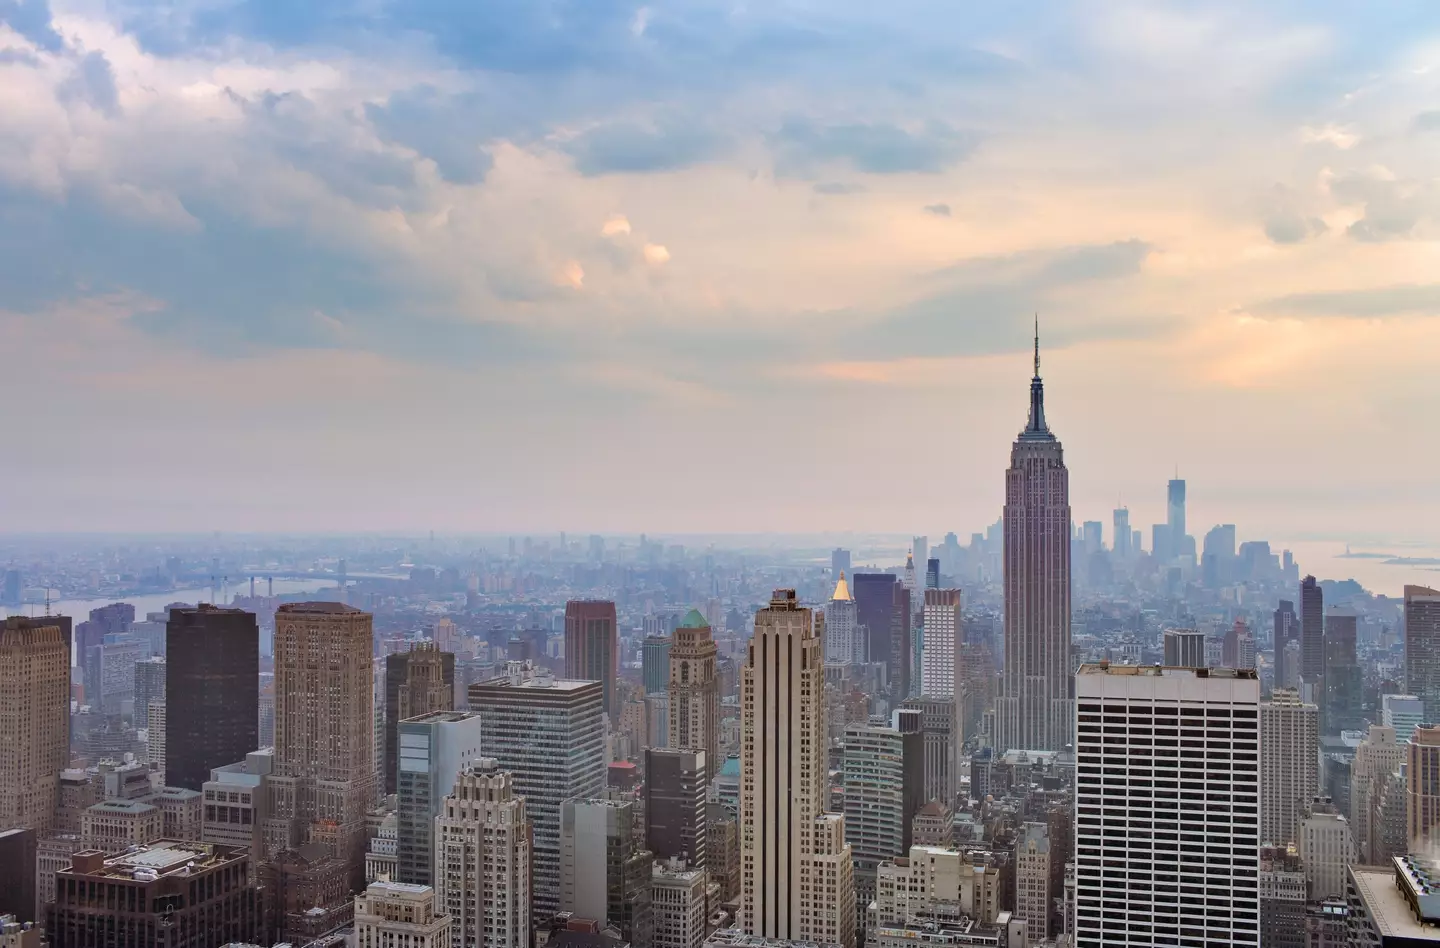 Unsurprisingly, New York was revealed as one of the most expensive cities in the world.